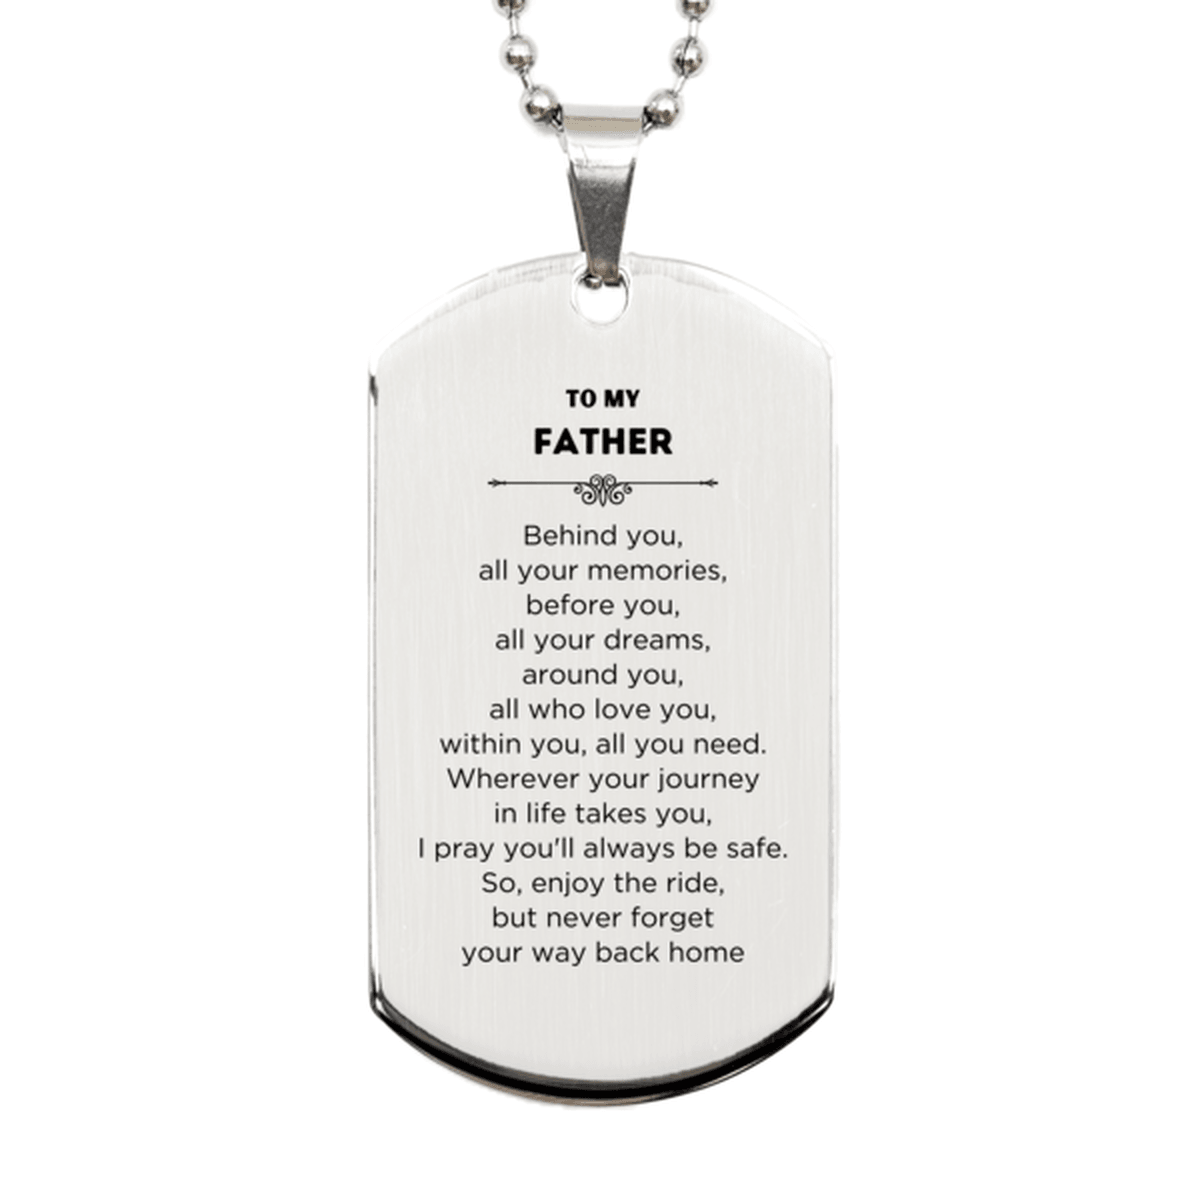 To My Father Gifts, Inspirational Father Silver Dog Tag, Sentimental Birthday Christmas Unique Gifts For Father Behind you, all your memories, before you, all your dreams, around you, all who love you, within you, all you need - Mallard Moon Gift Shop